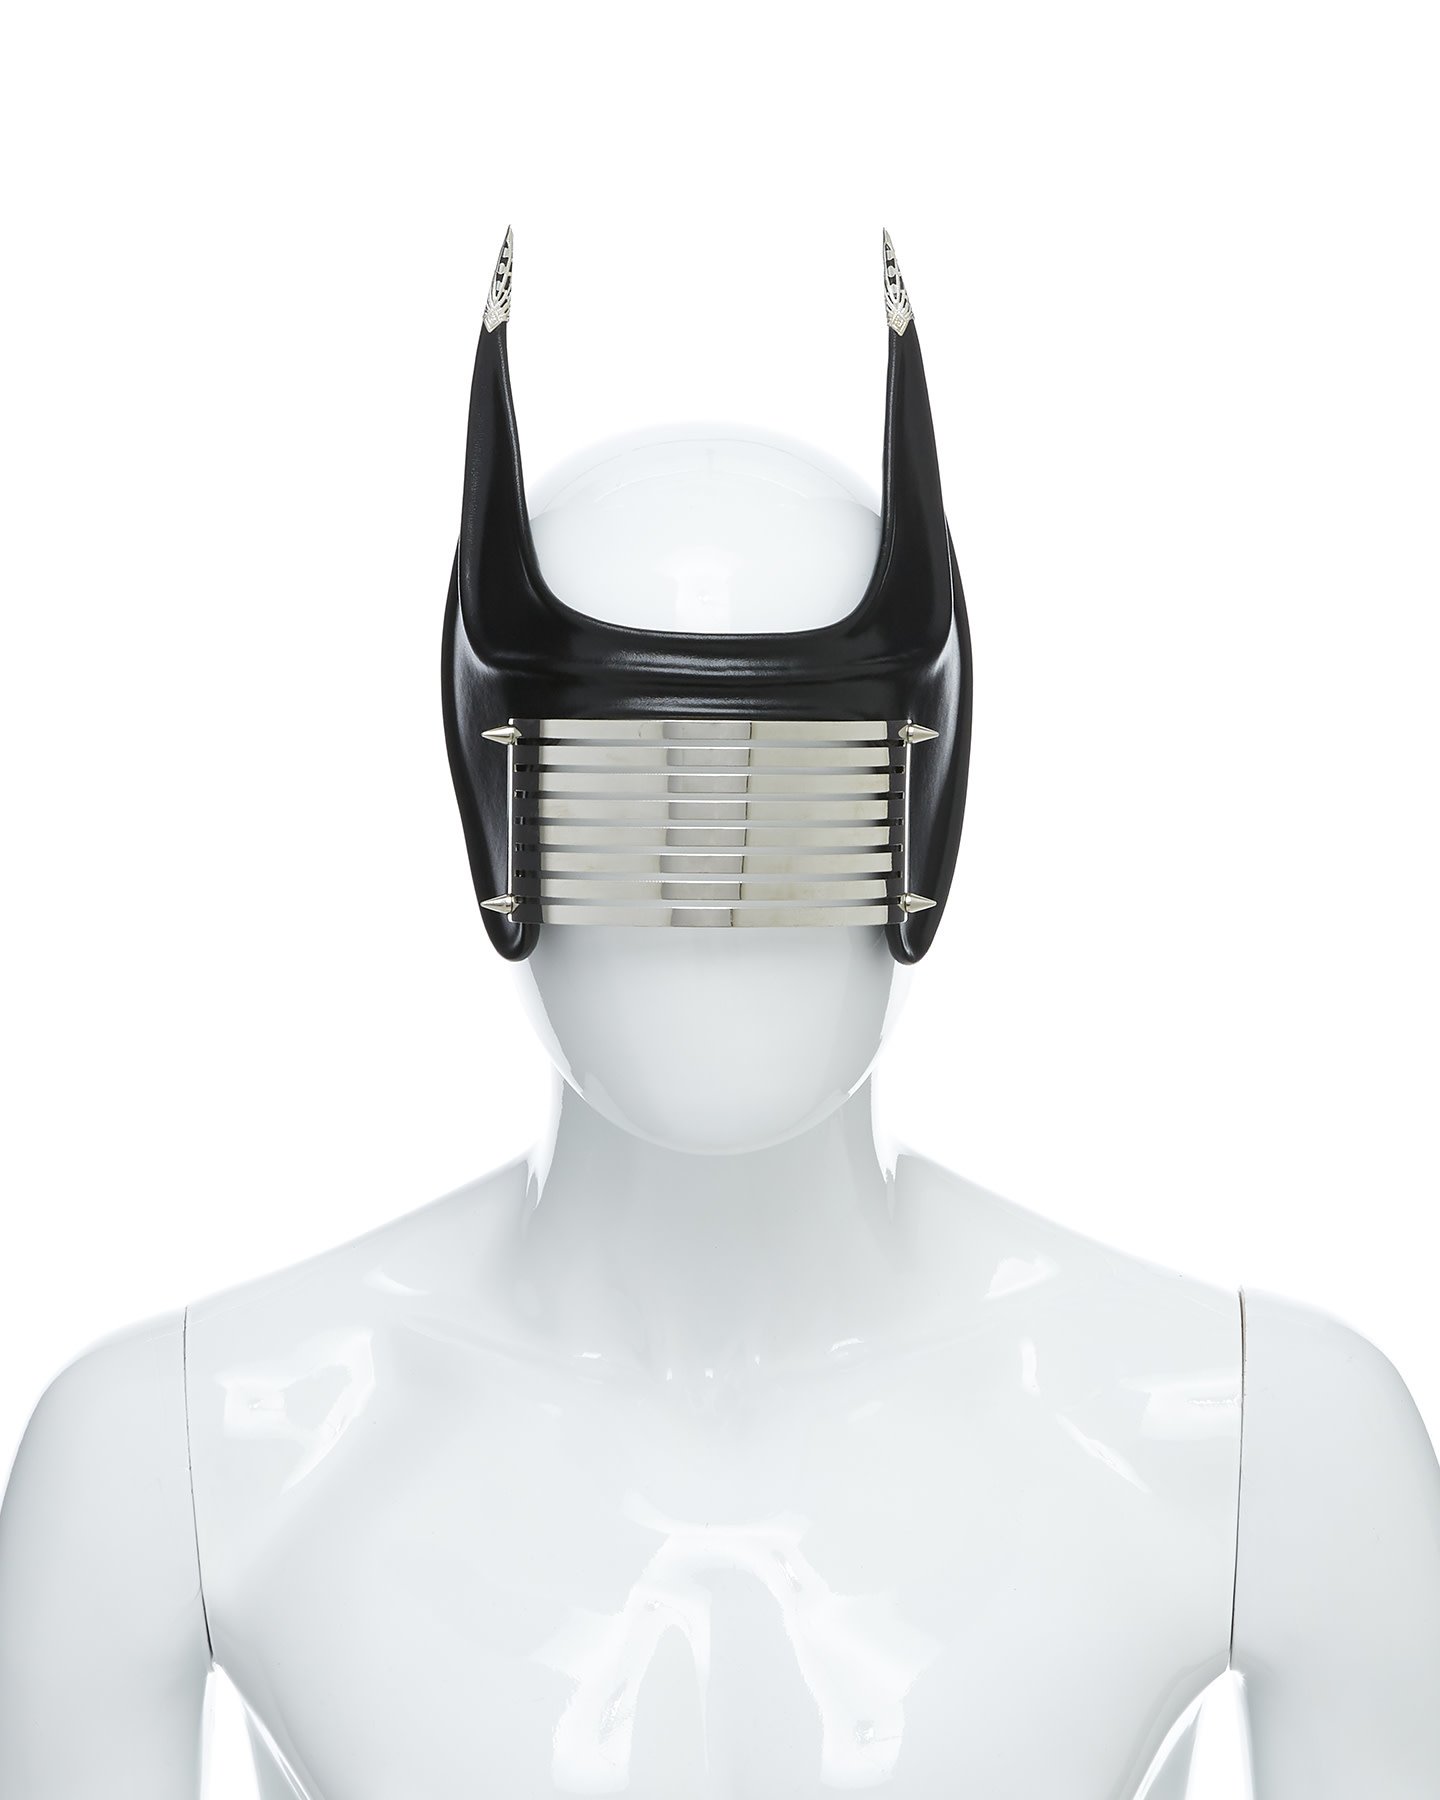 GRID FACE MASK WITH 8 SLITS